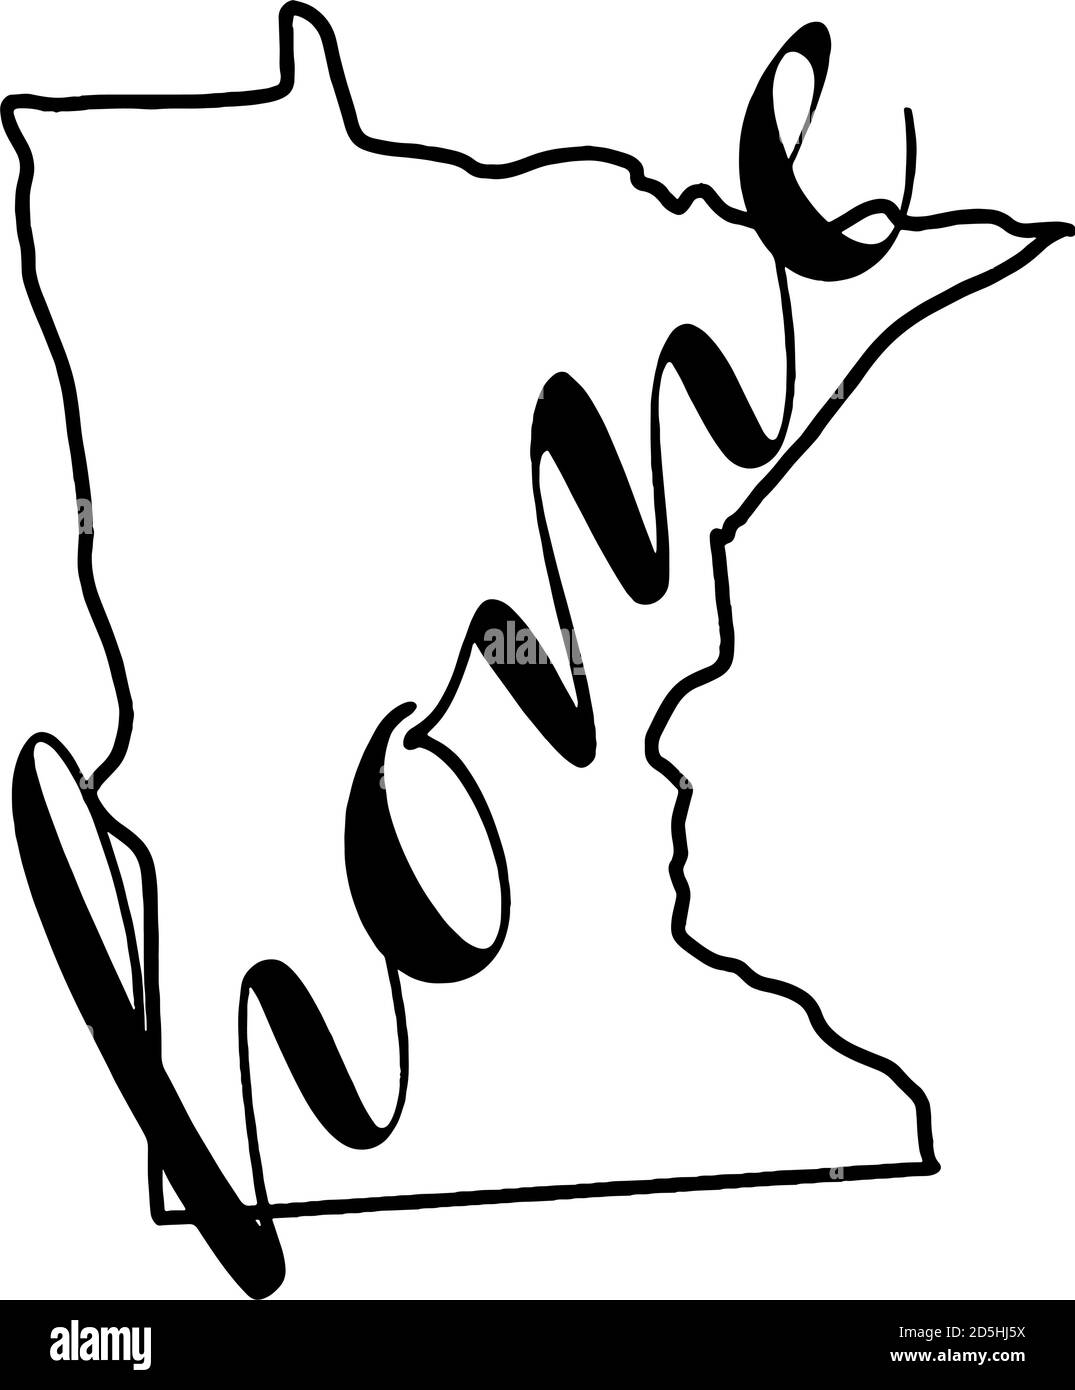 Minnesota state map outline with the word home written across it Stock Vector